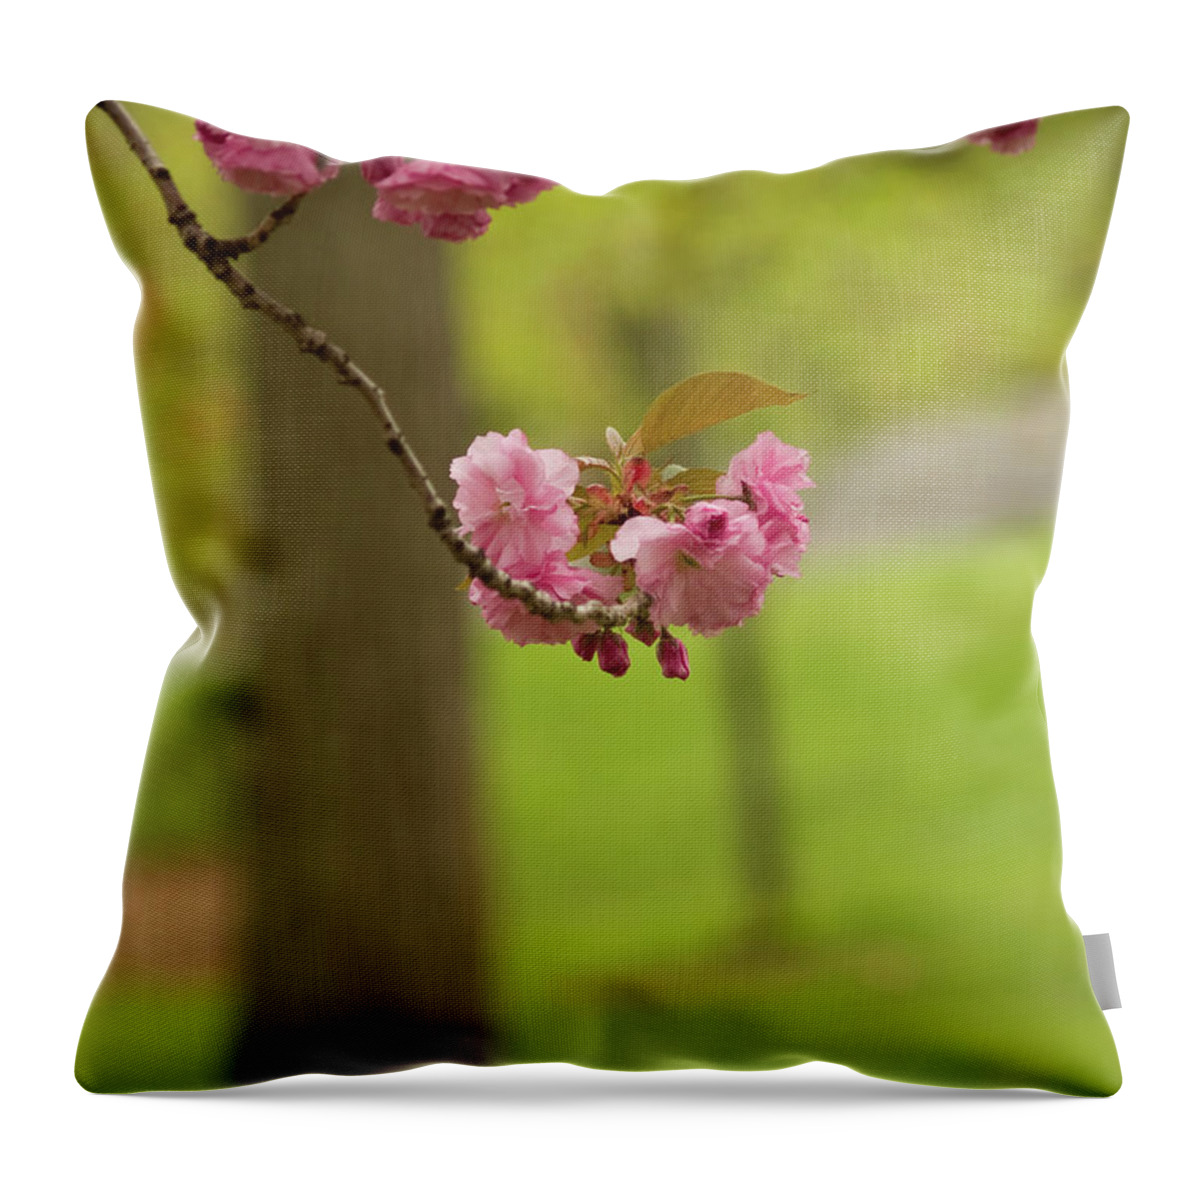 Central Park Throw Pillow featuring the photograph Springtime Blossoms In Central Park by Dorothy Lee